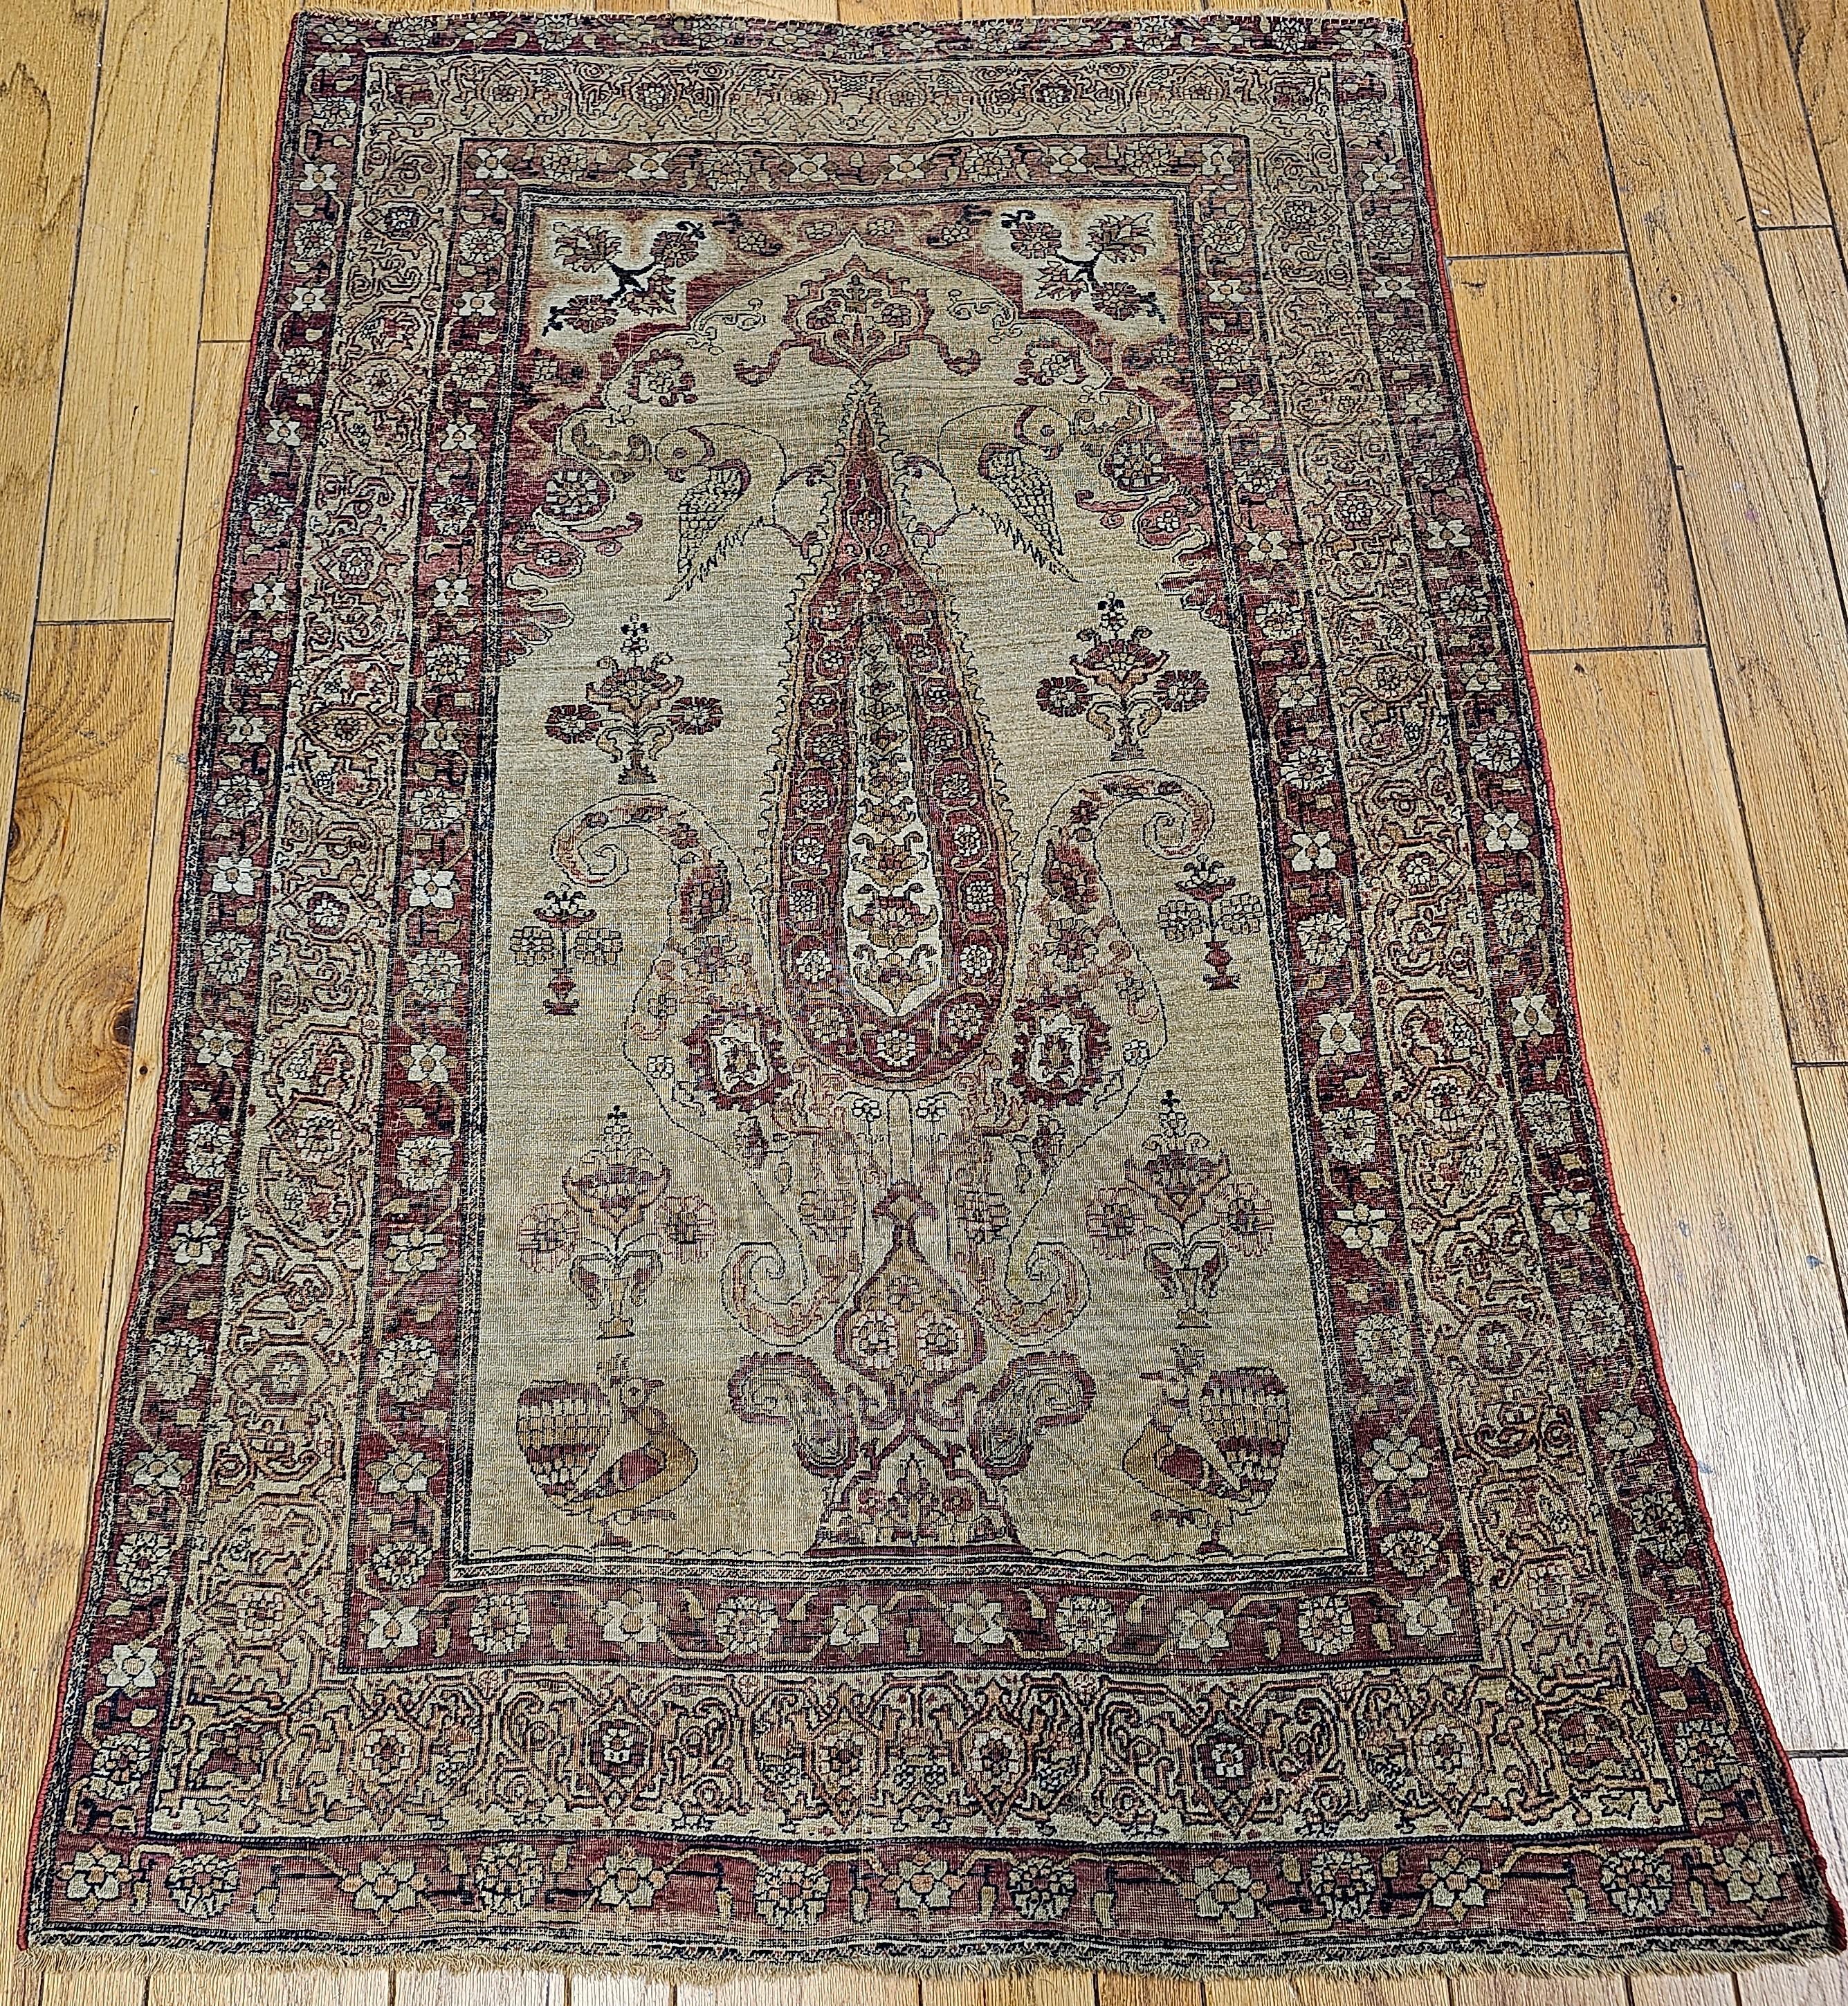 19th Century Persian Kerman Lavar Pictorial “Tree of Life” Rug in Camel, Red For Sale 13